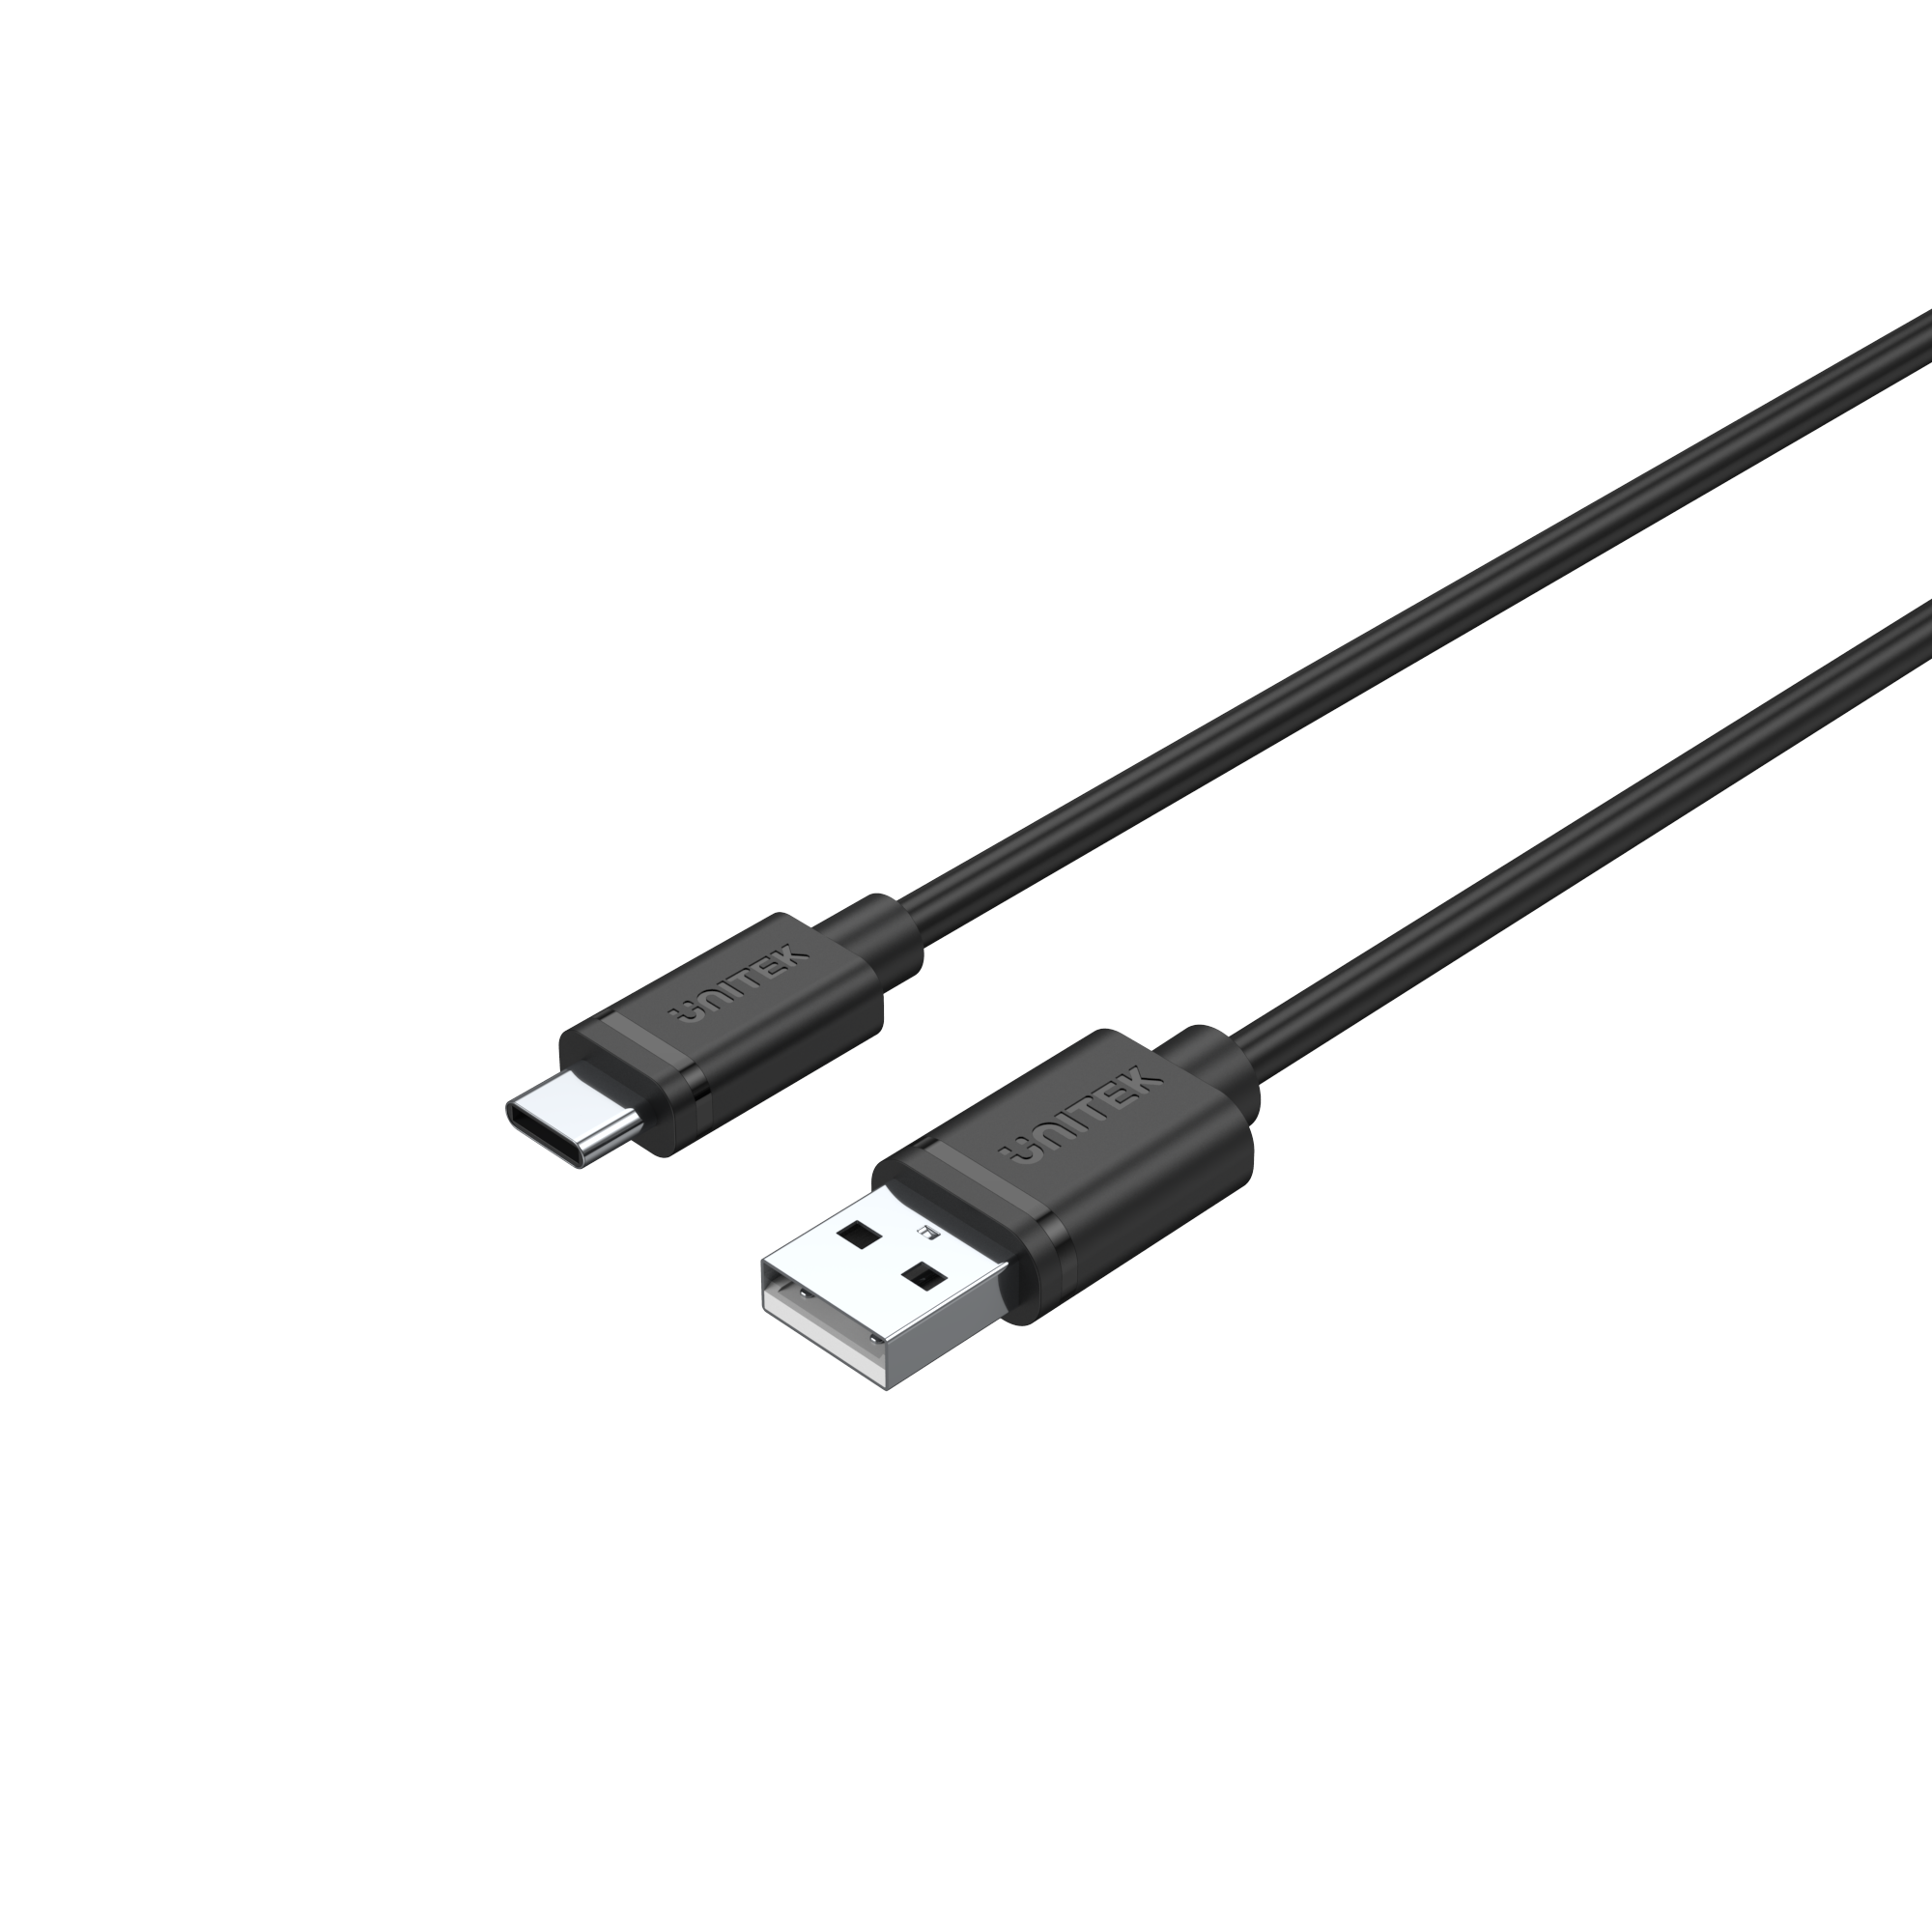 USB to USB-C Charging Cable